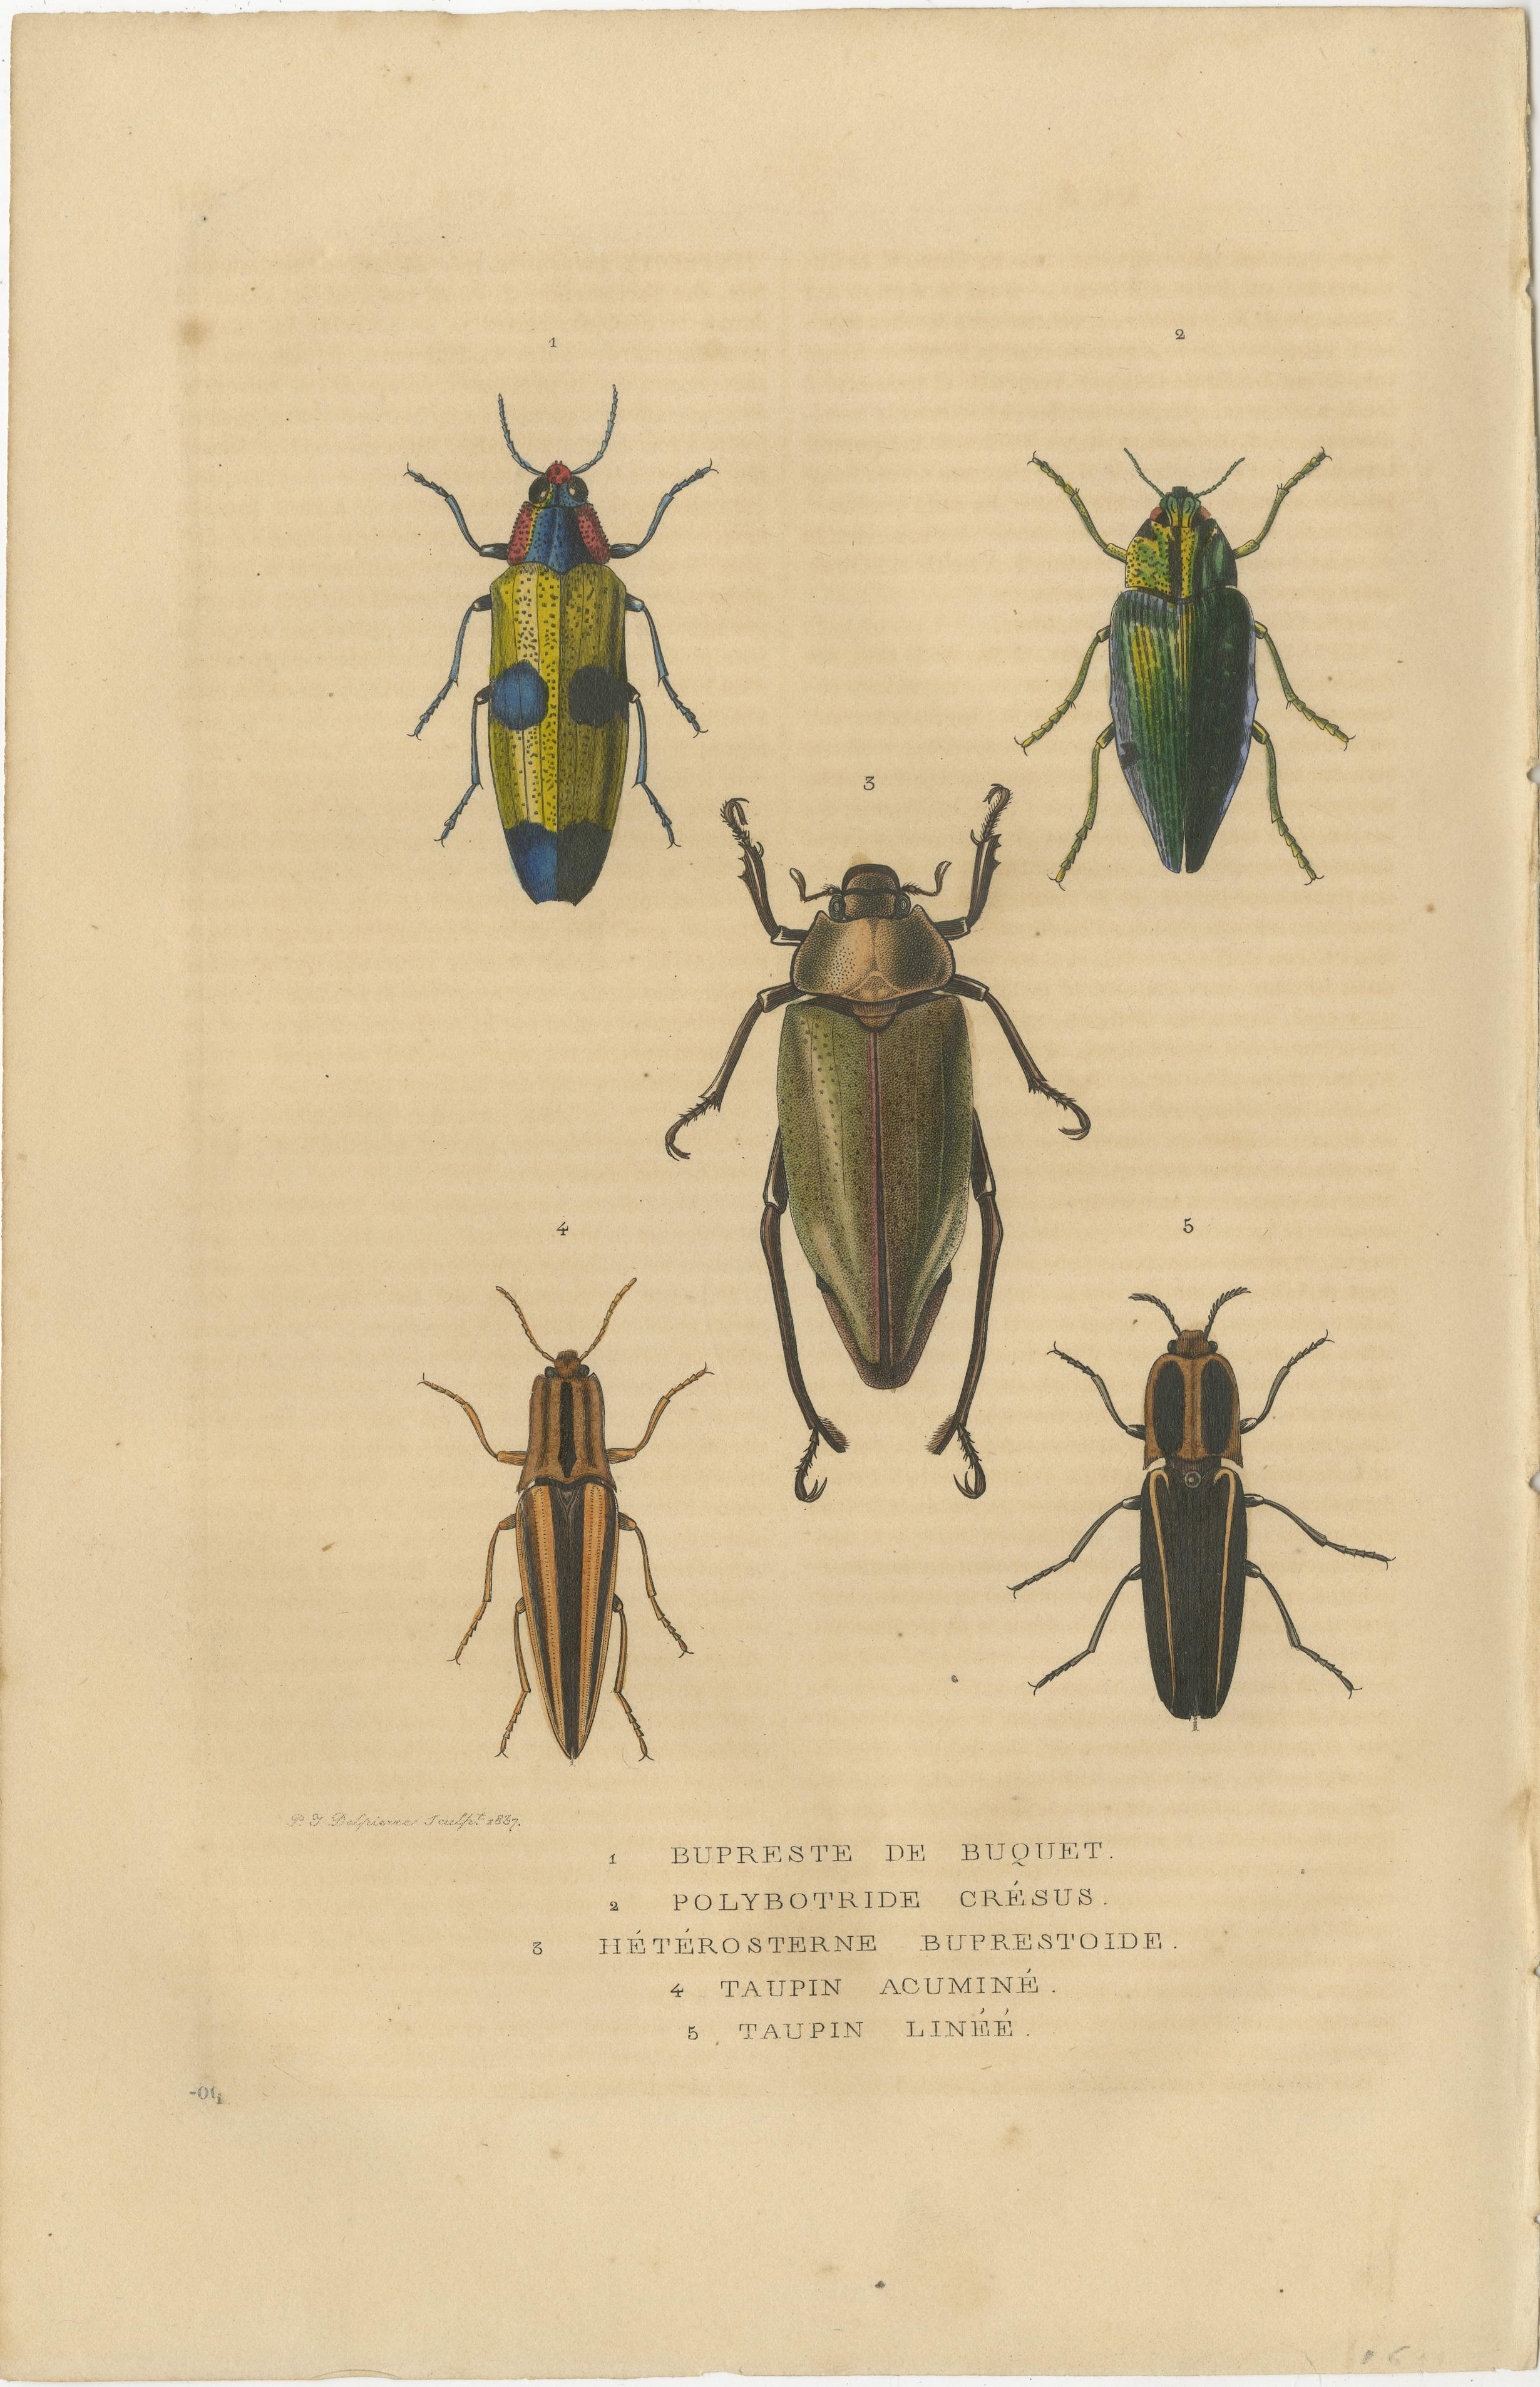 The two engravings presented are detailed handcolored illustrations of beetles, produced by Drapiez in 1845. These artworks are scientific in nature, meant for the study and appreciation of entomology.

On the left side, we see four beetles, each